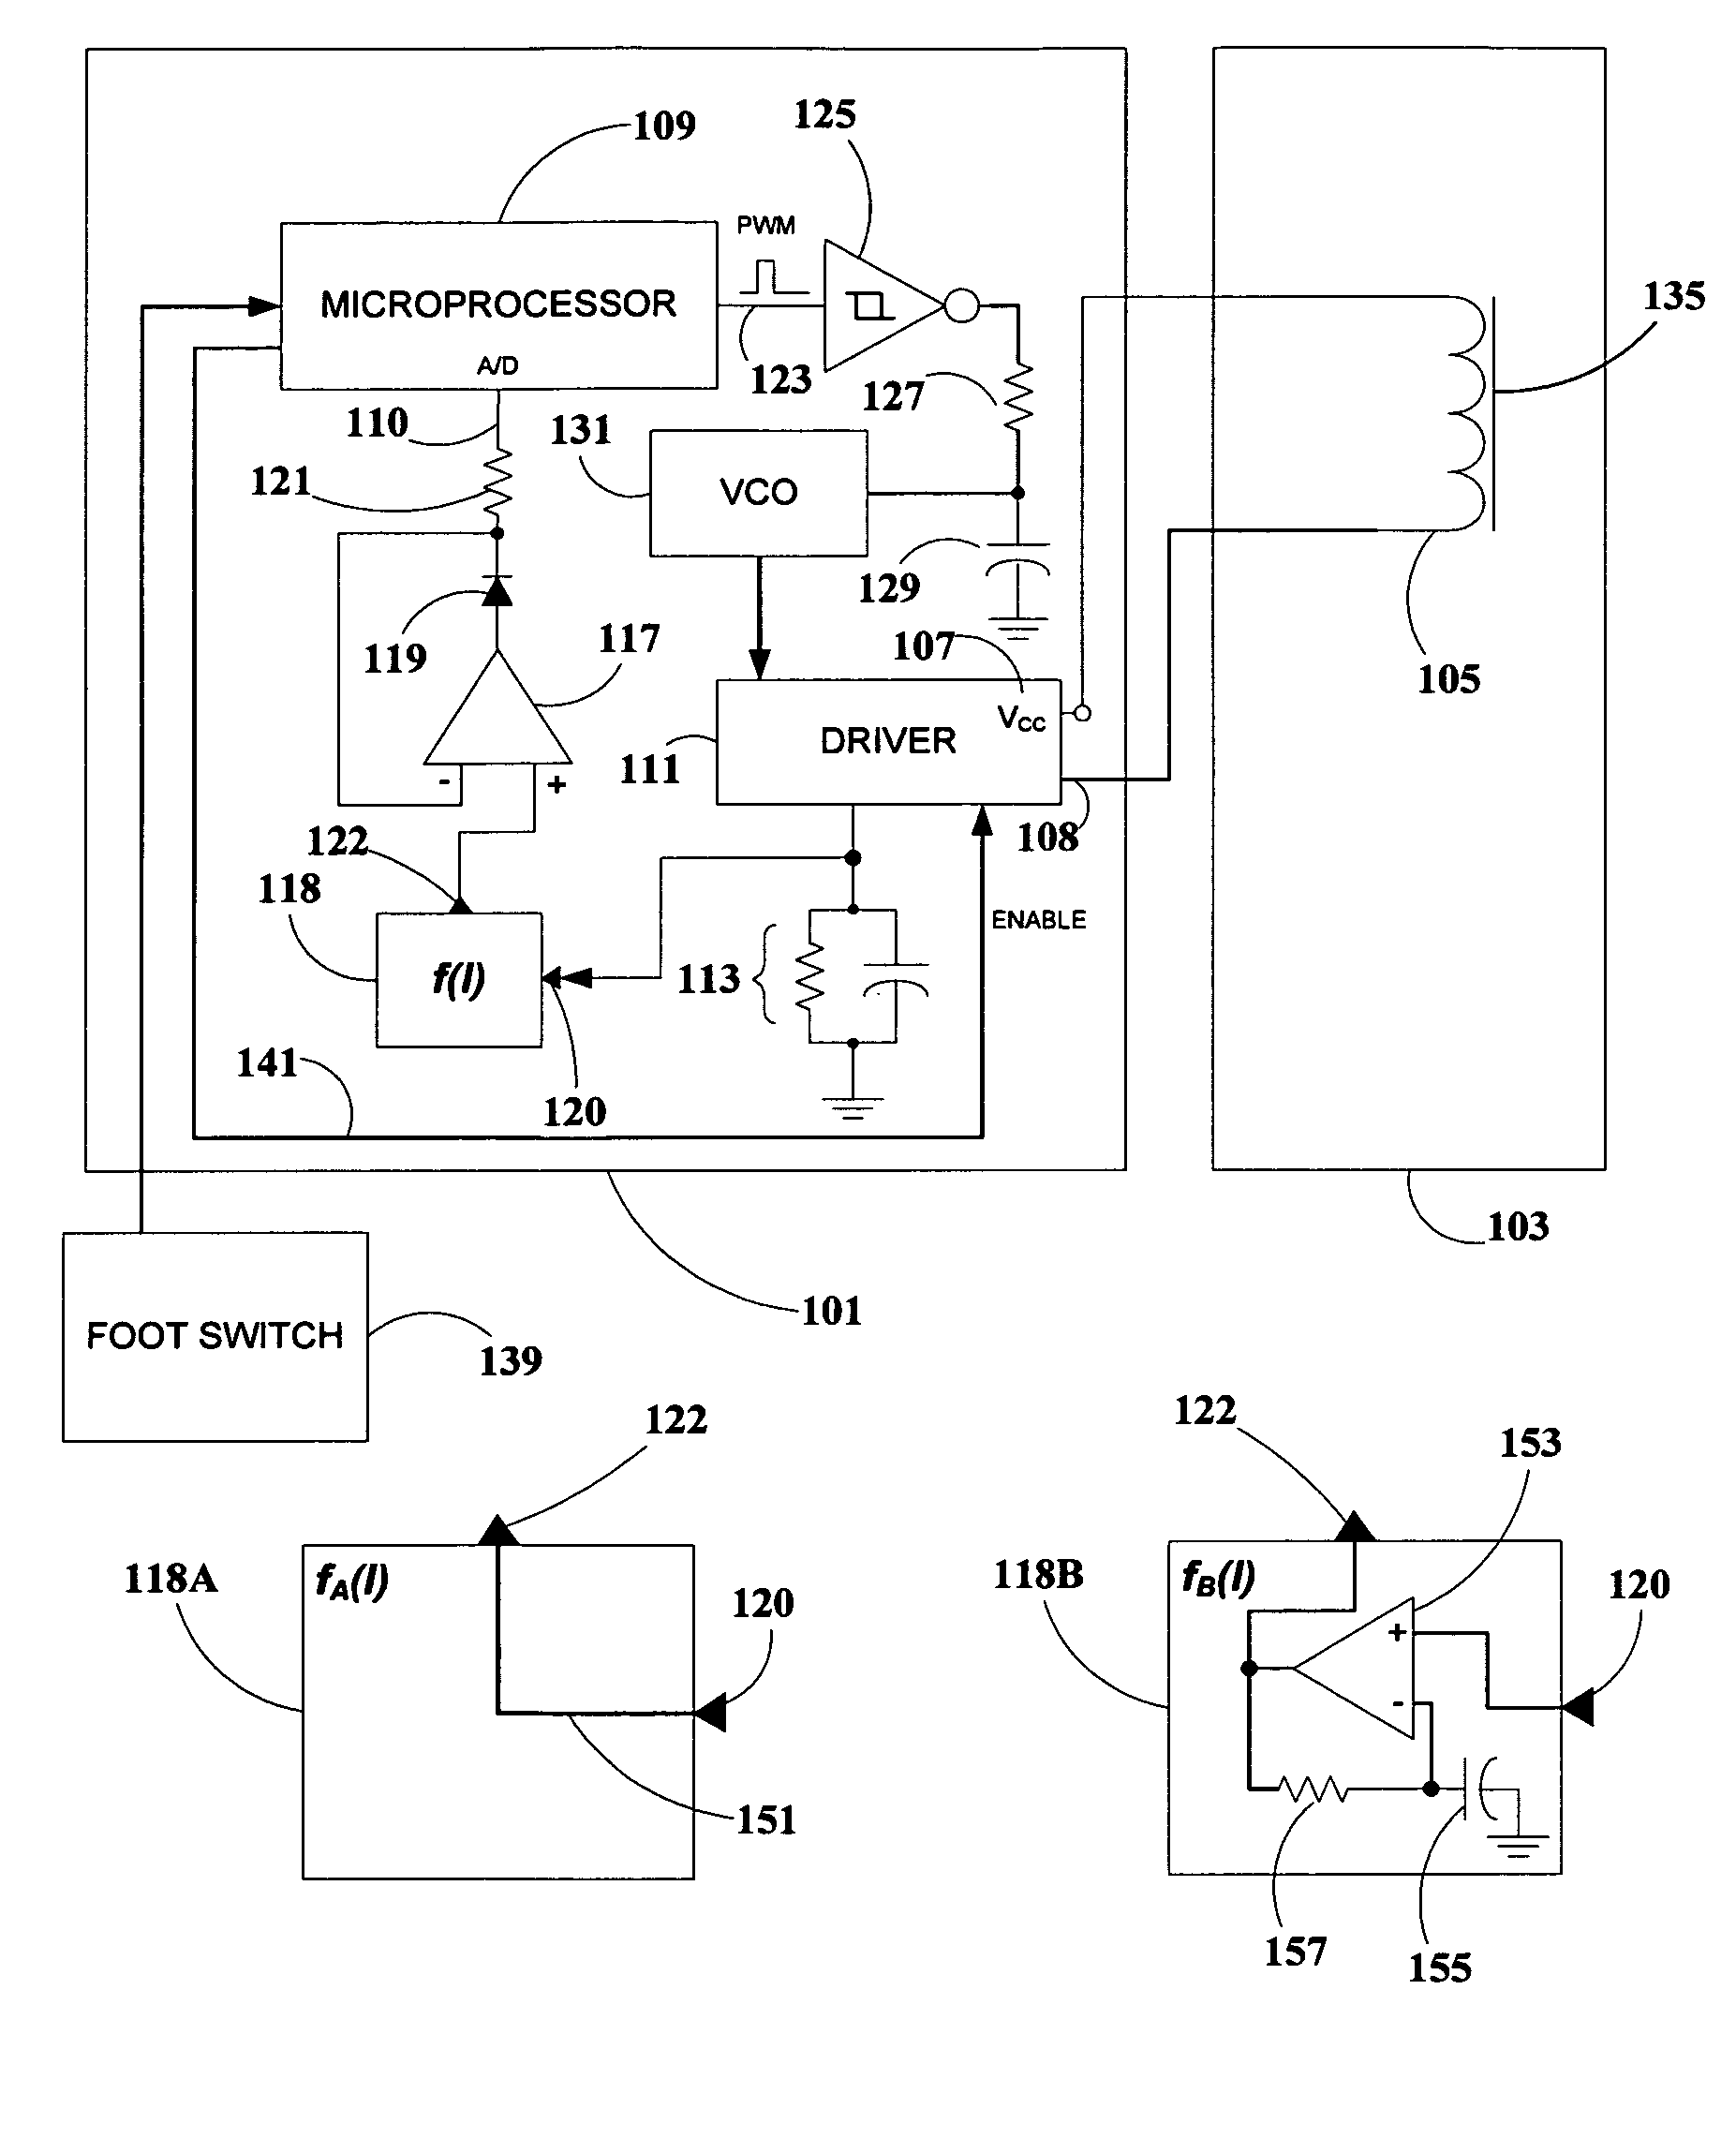 Apparatus and method for controlling excitation frequency of magnetostrictive transducer